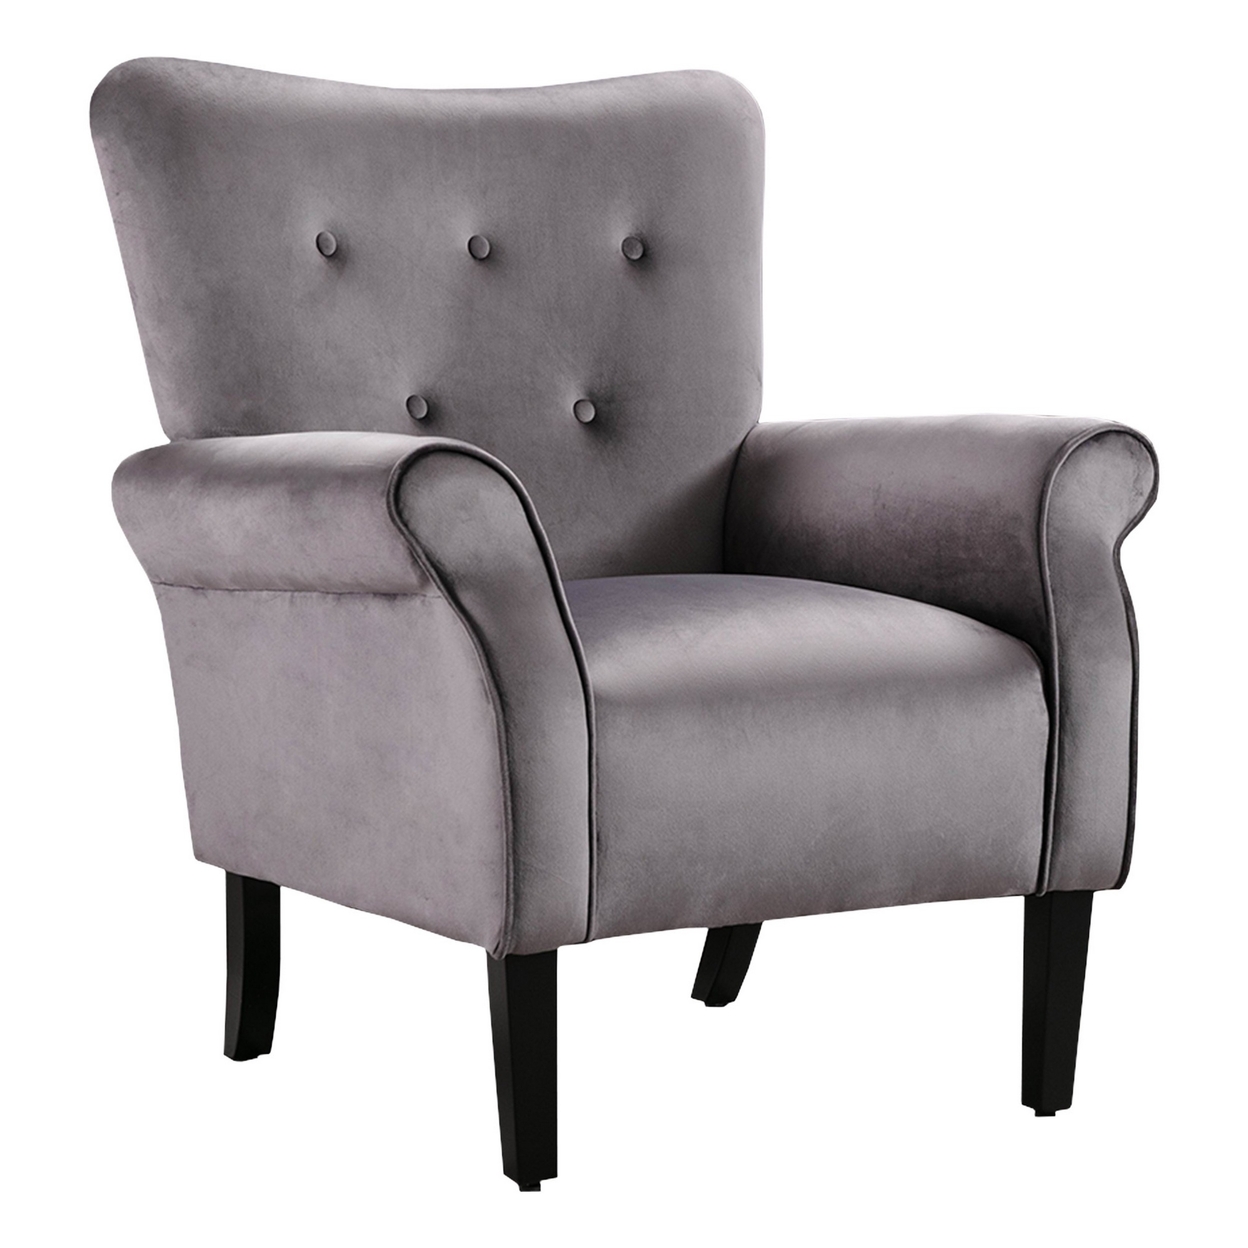 Cilic 32 Inch Accent Chair, Button Tufted Back, Rolled Arms, Gray Fabric- Saltoro Sherpi